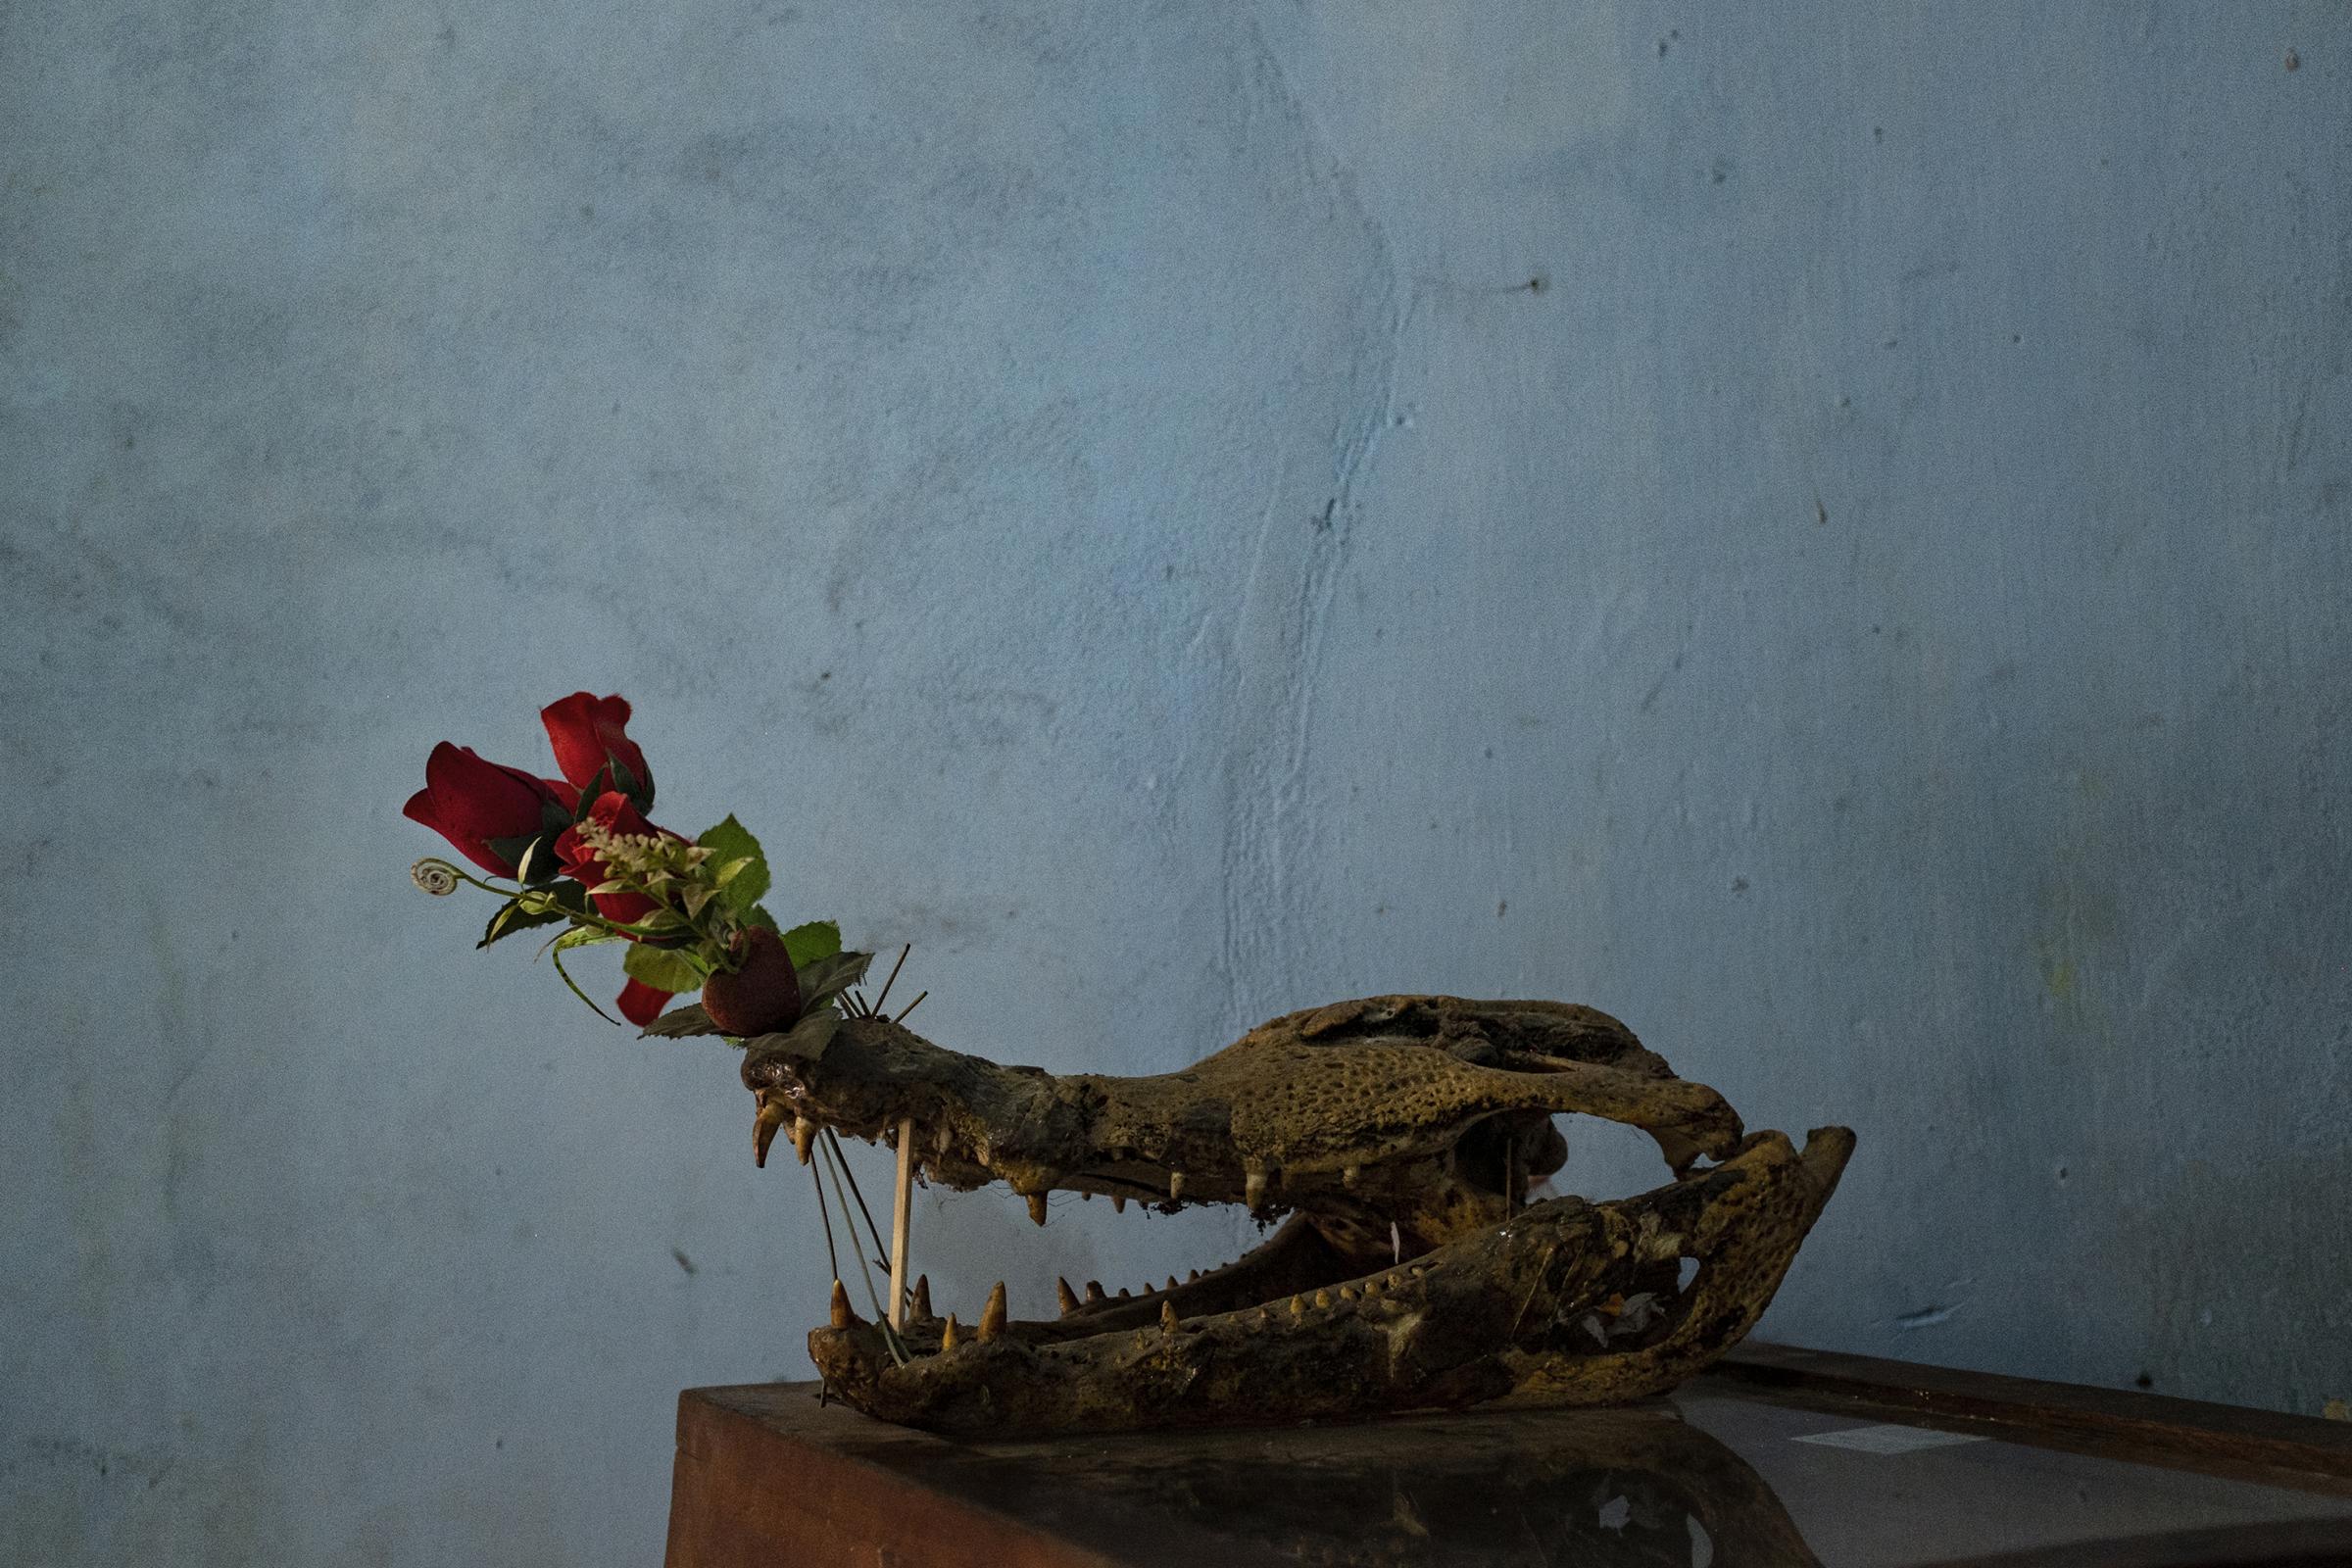 A caiman skull is used as a decorative object in a restaurant in the town of Nauta, district of Loreto in Peru. It is common to find bones or parts of stuffed animals decorating homes and businesses in towns, villages and cities in the Amazon.